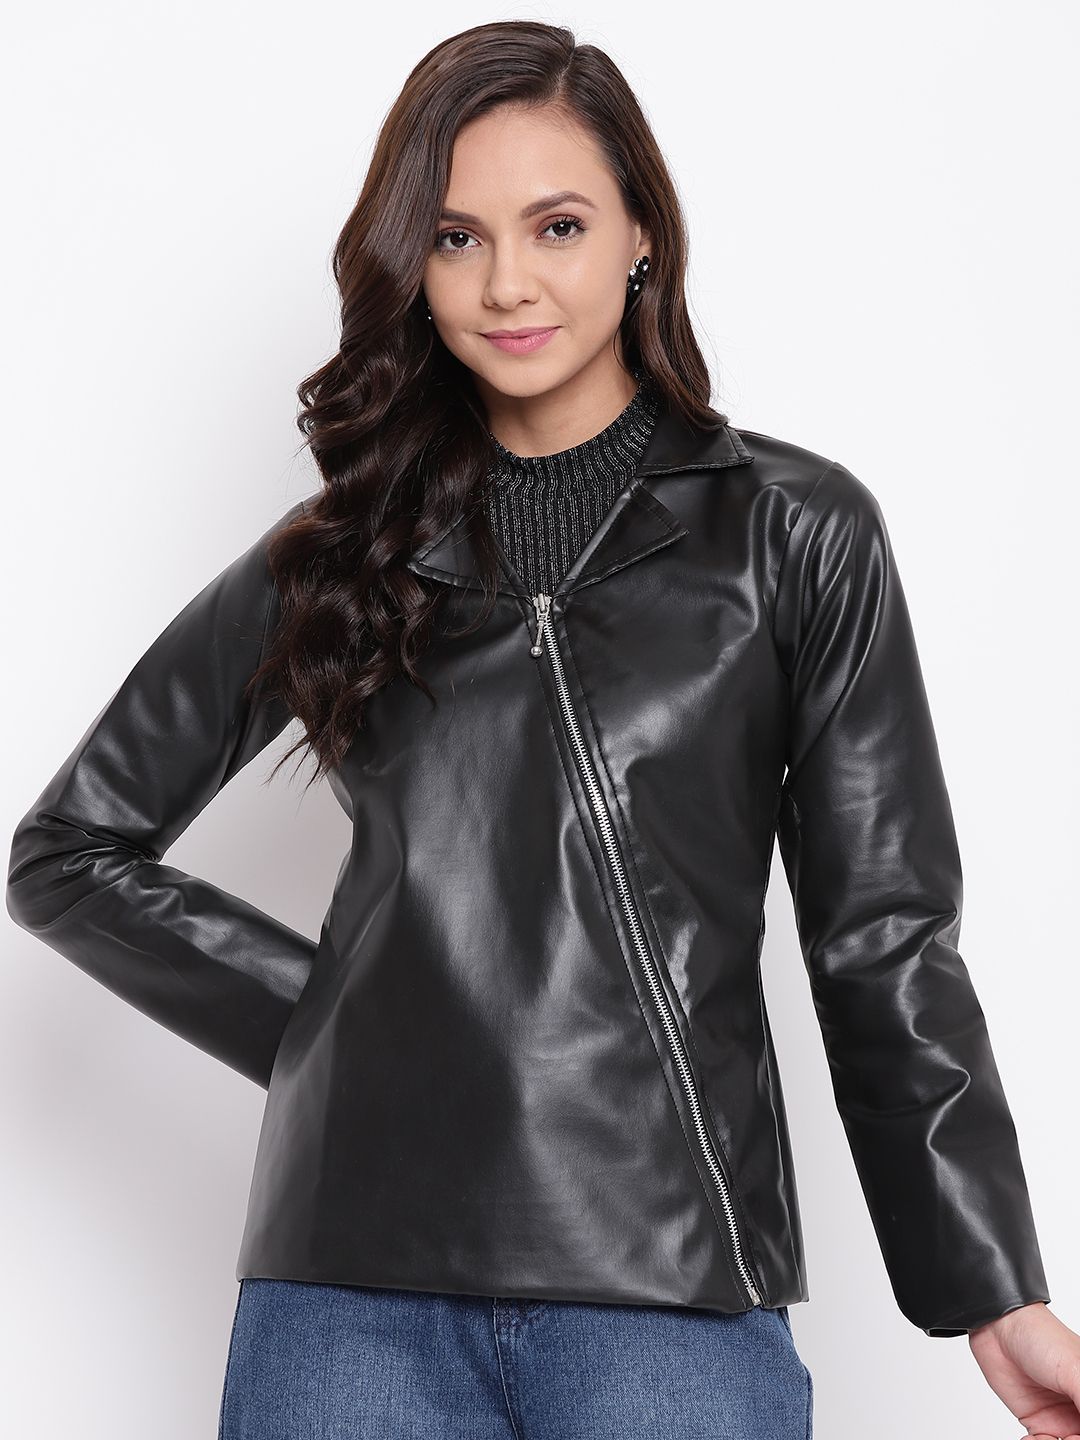 Belle Fille Women Black Solid Asymmetric Closure Leather Jacket Price in India